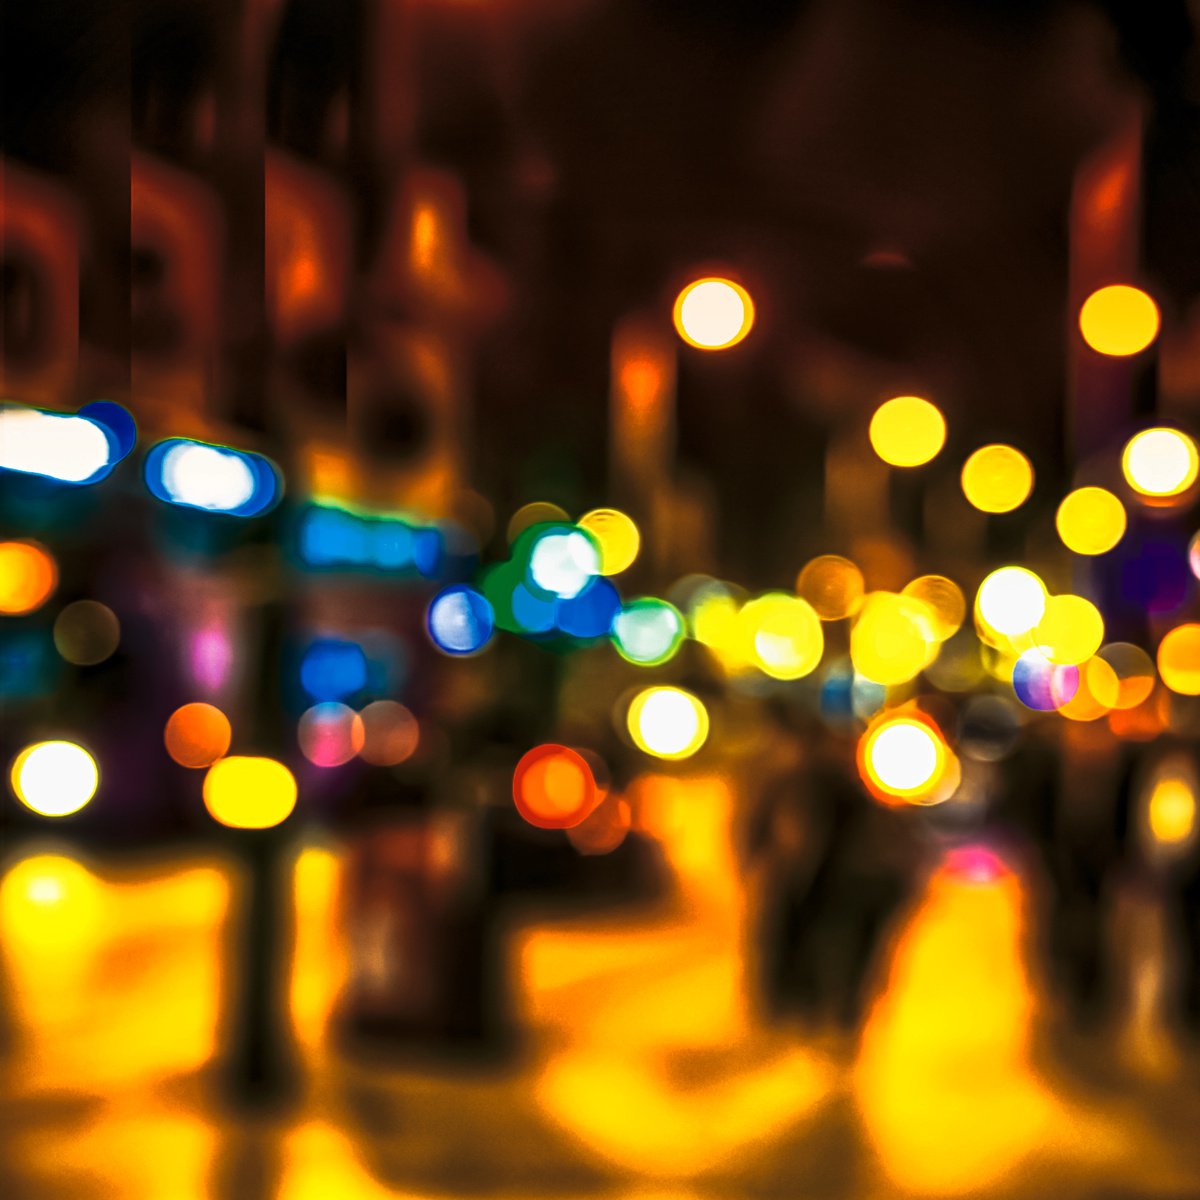 City Lights 1. Limited Edition Abstract Photograph Print #1/15. Nighttime abstract photog... by Graham Briggs